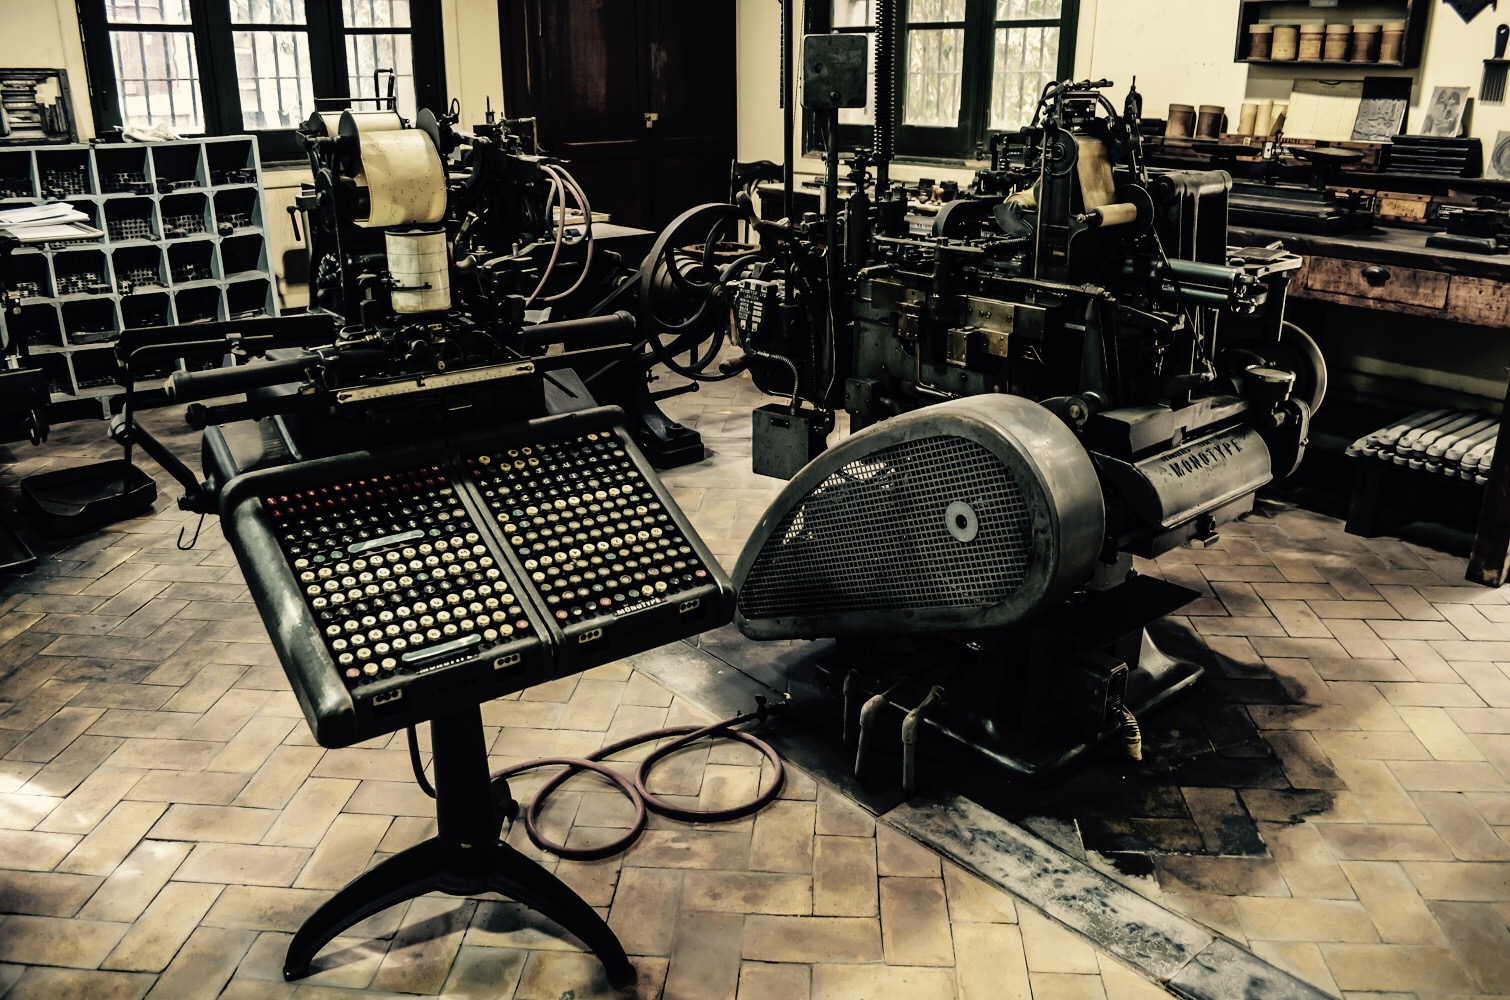 Inside the Museum of the old press